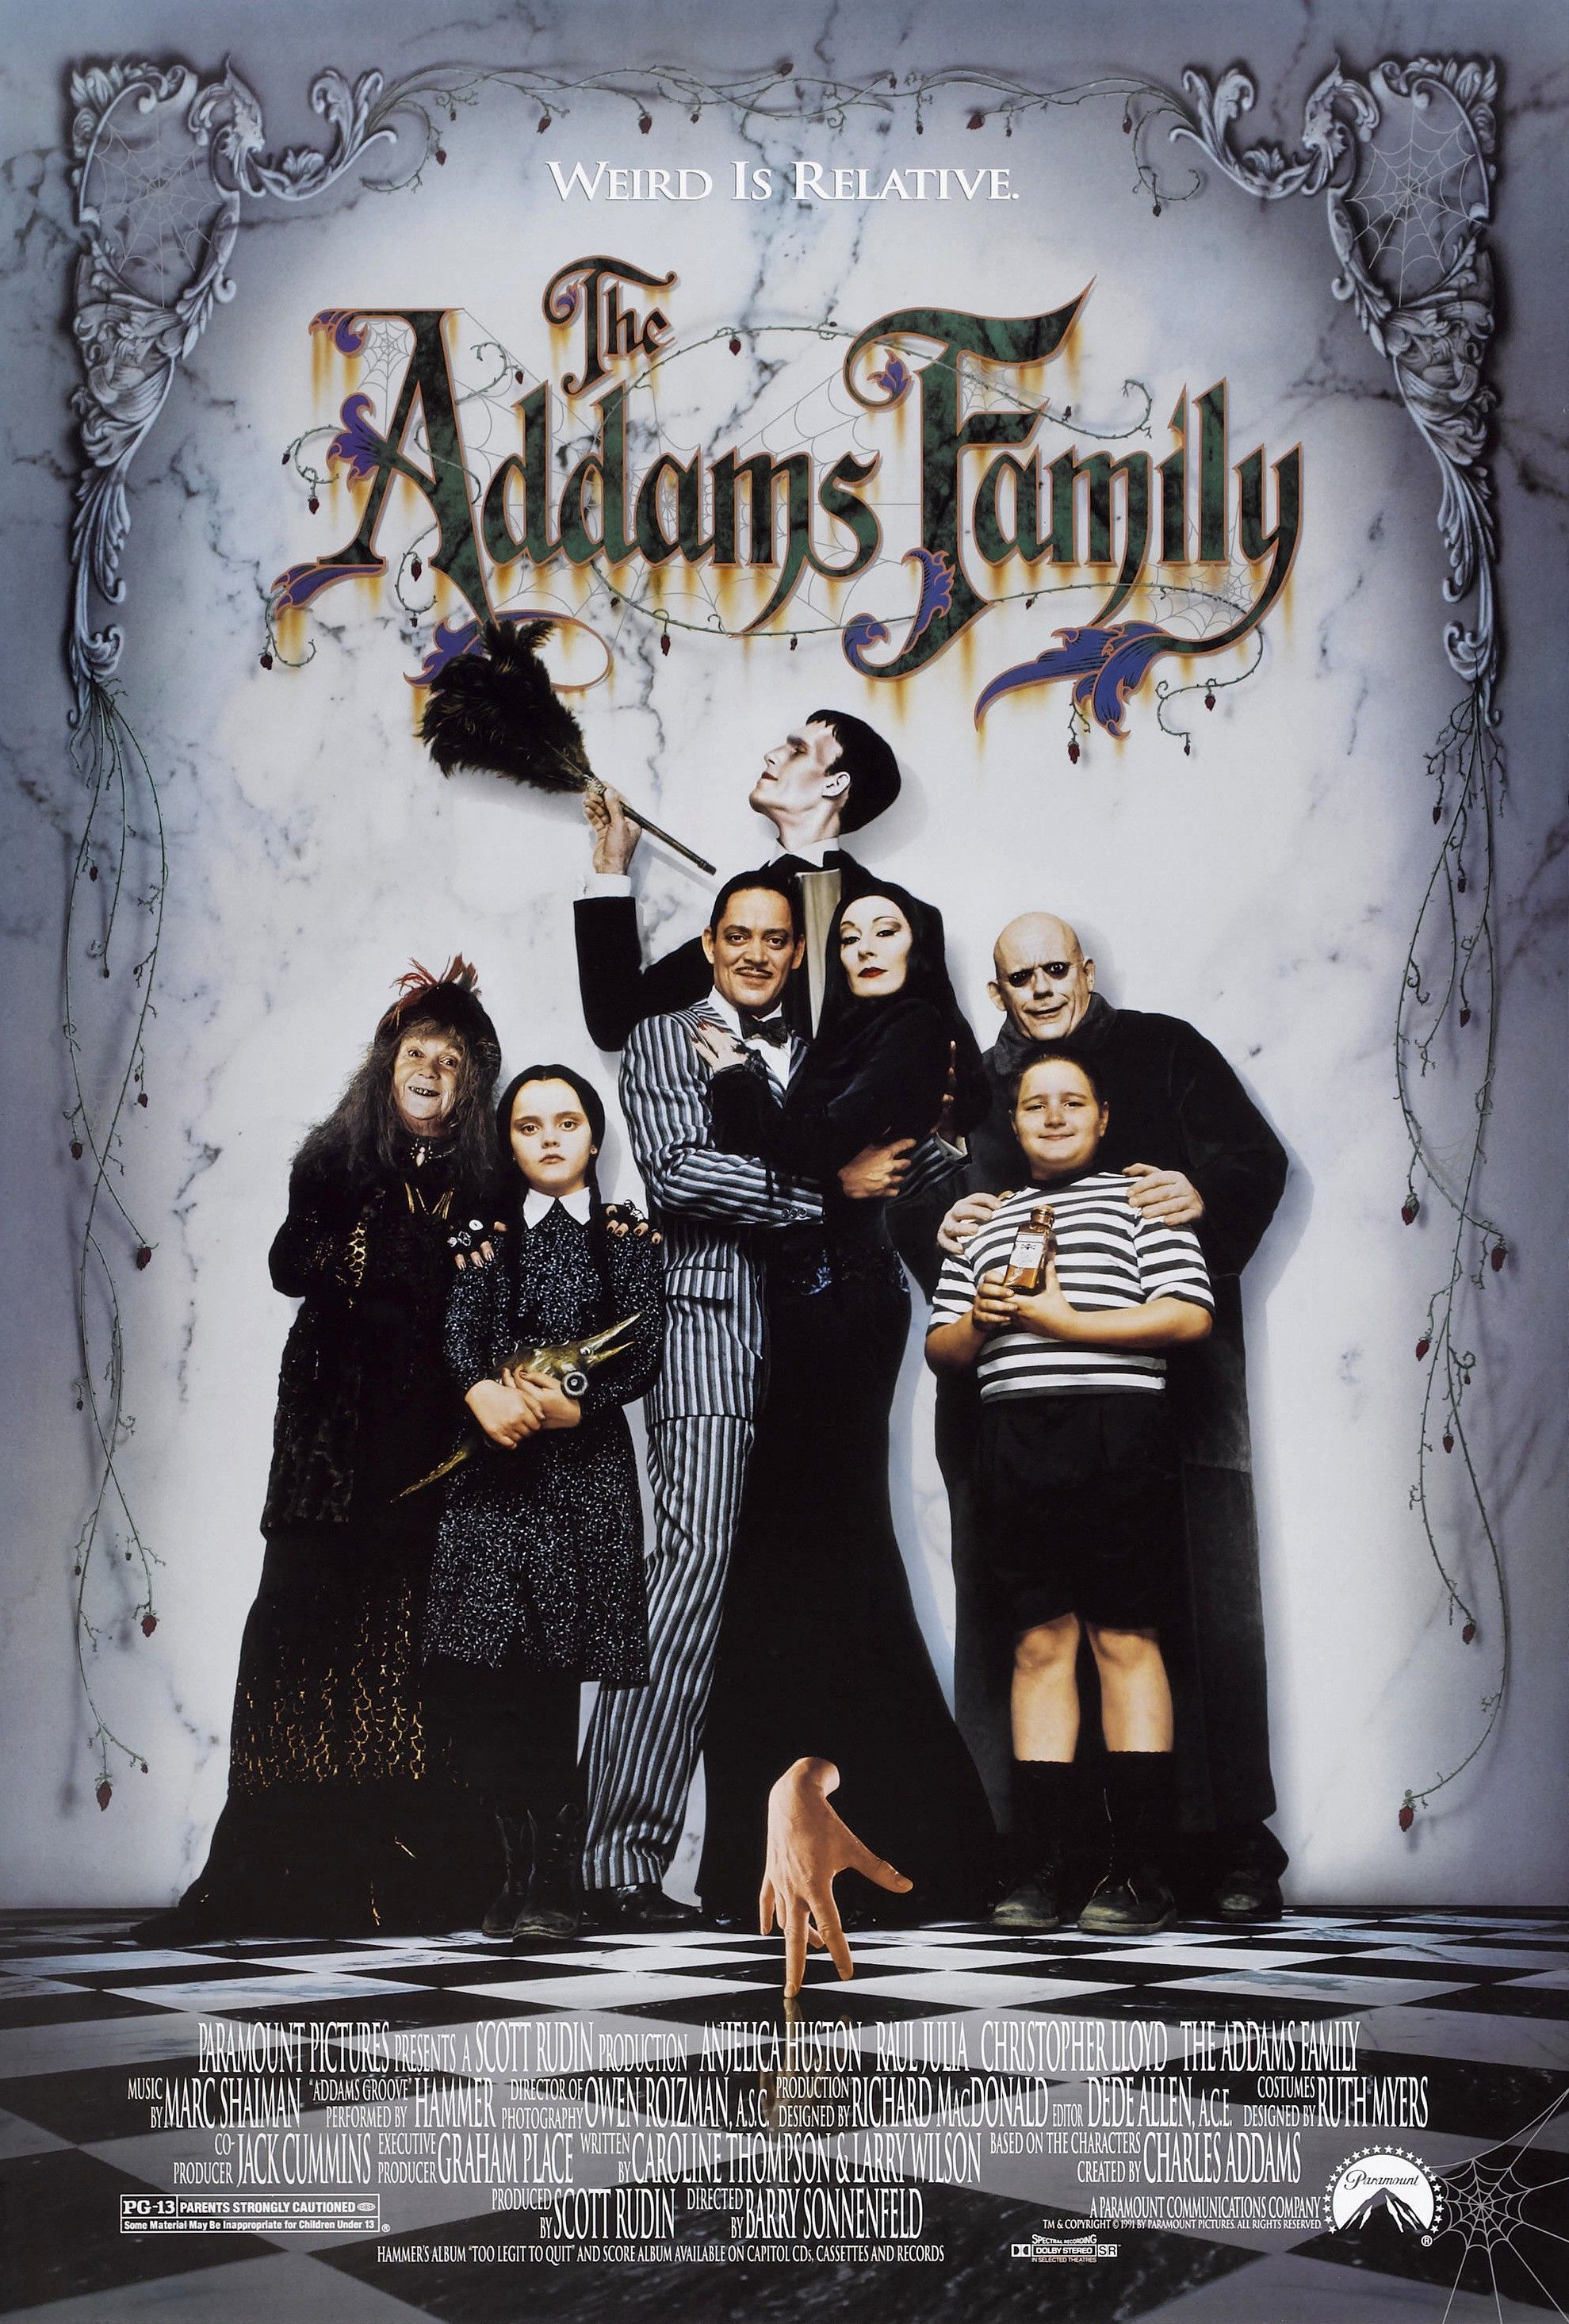 The Addams Family Film Poster